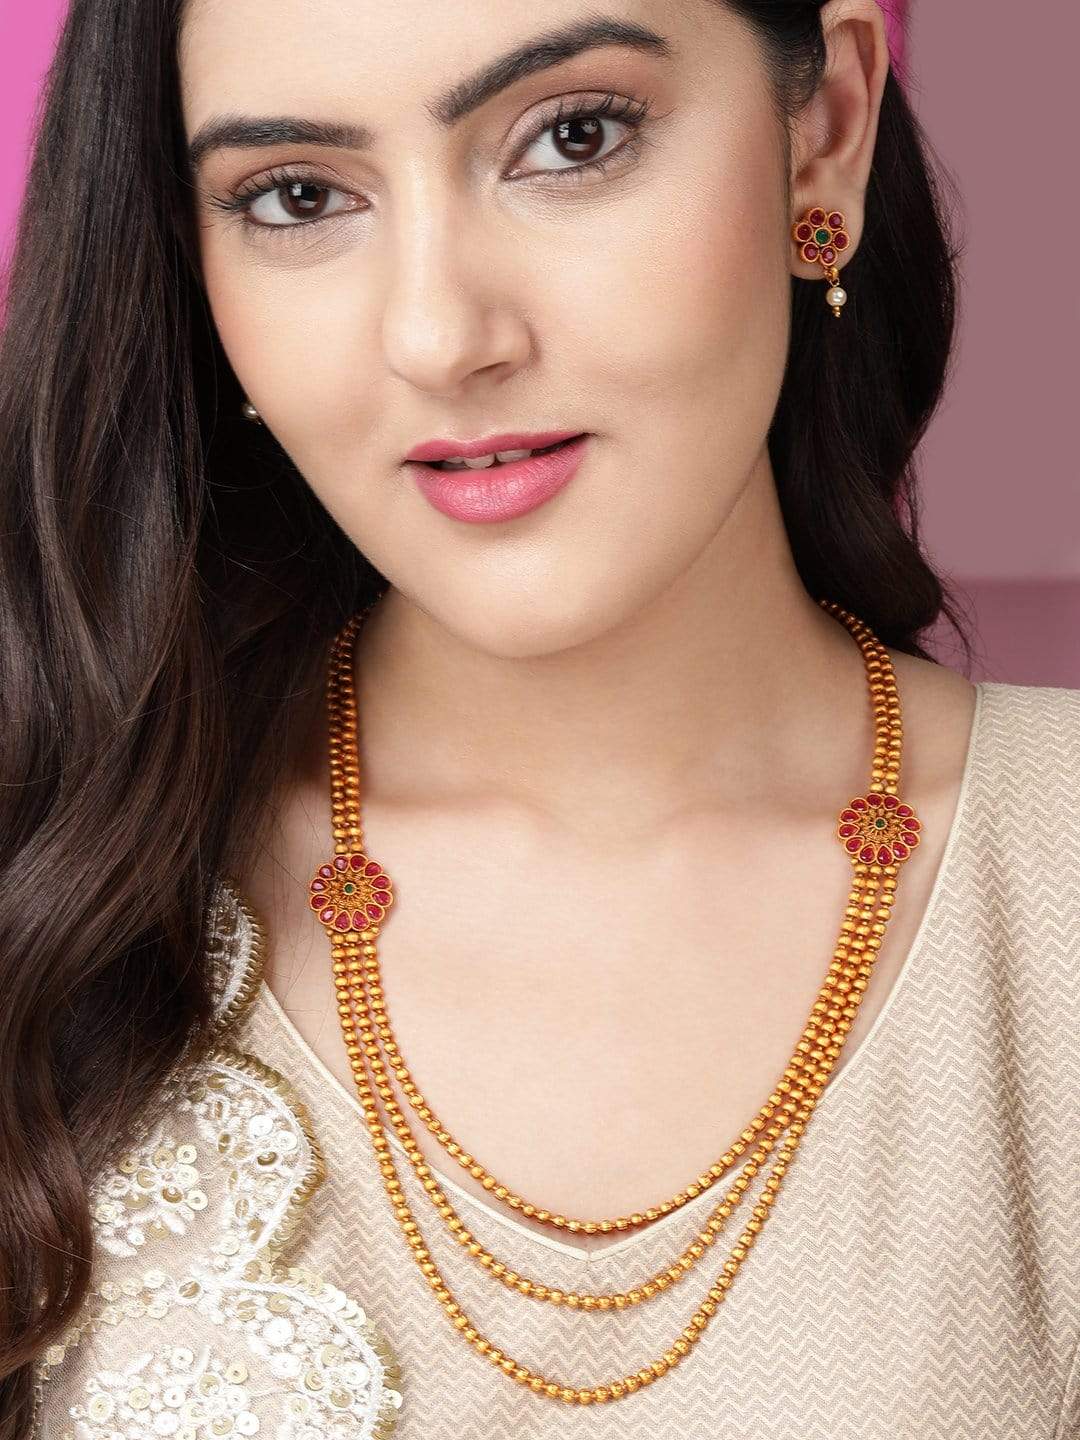 Rubans Traditional Gold Plated Layered Necklace Set With Ruby Stoned Earrings Earrings